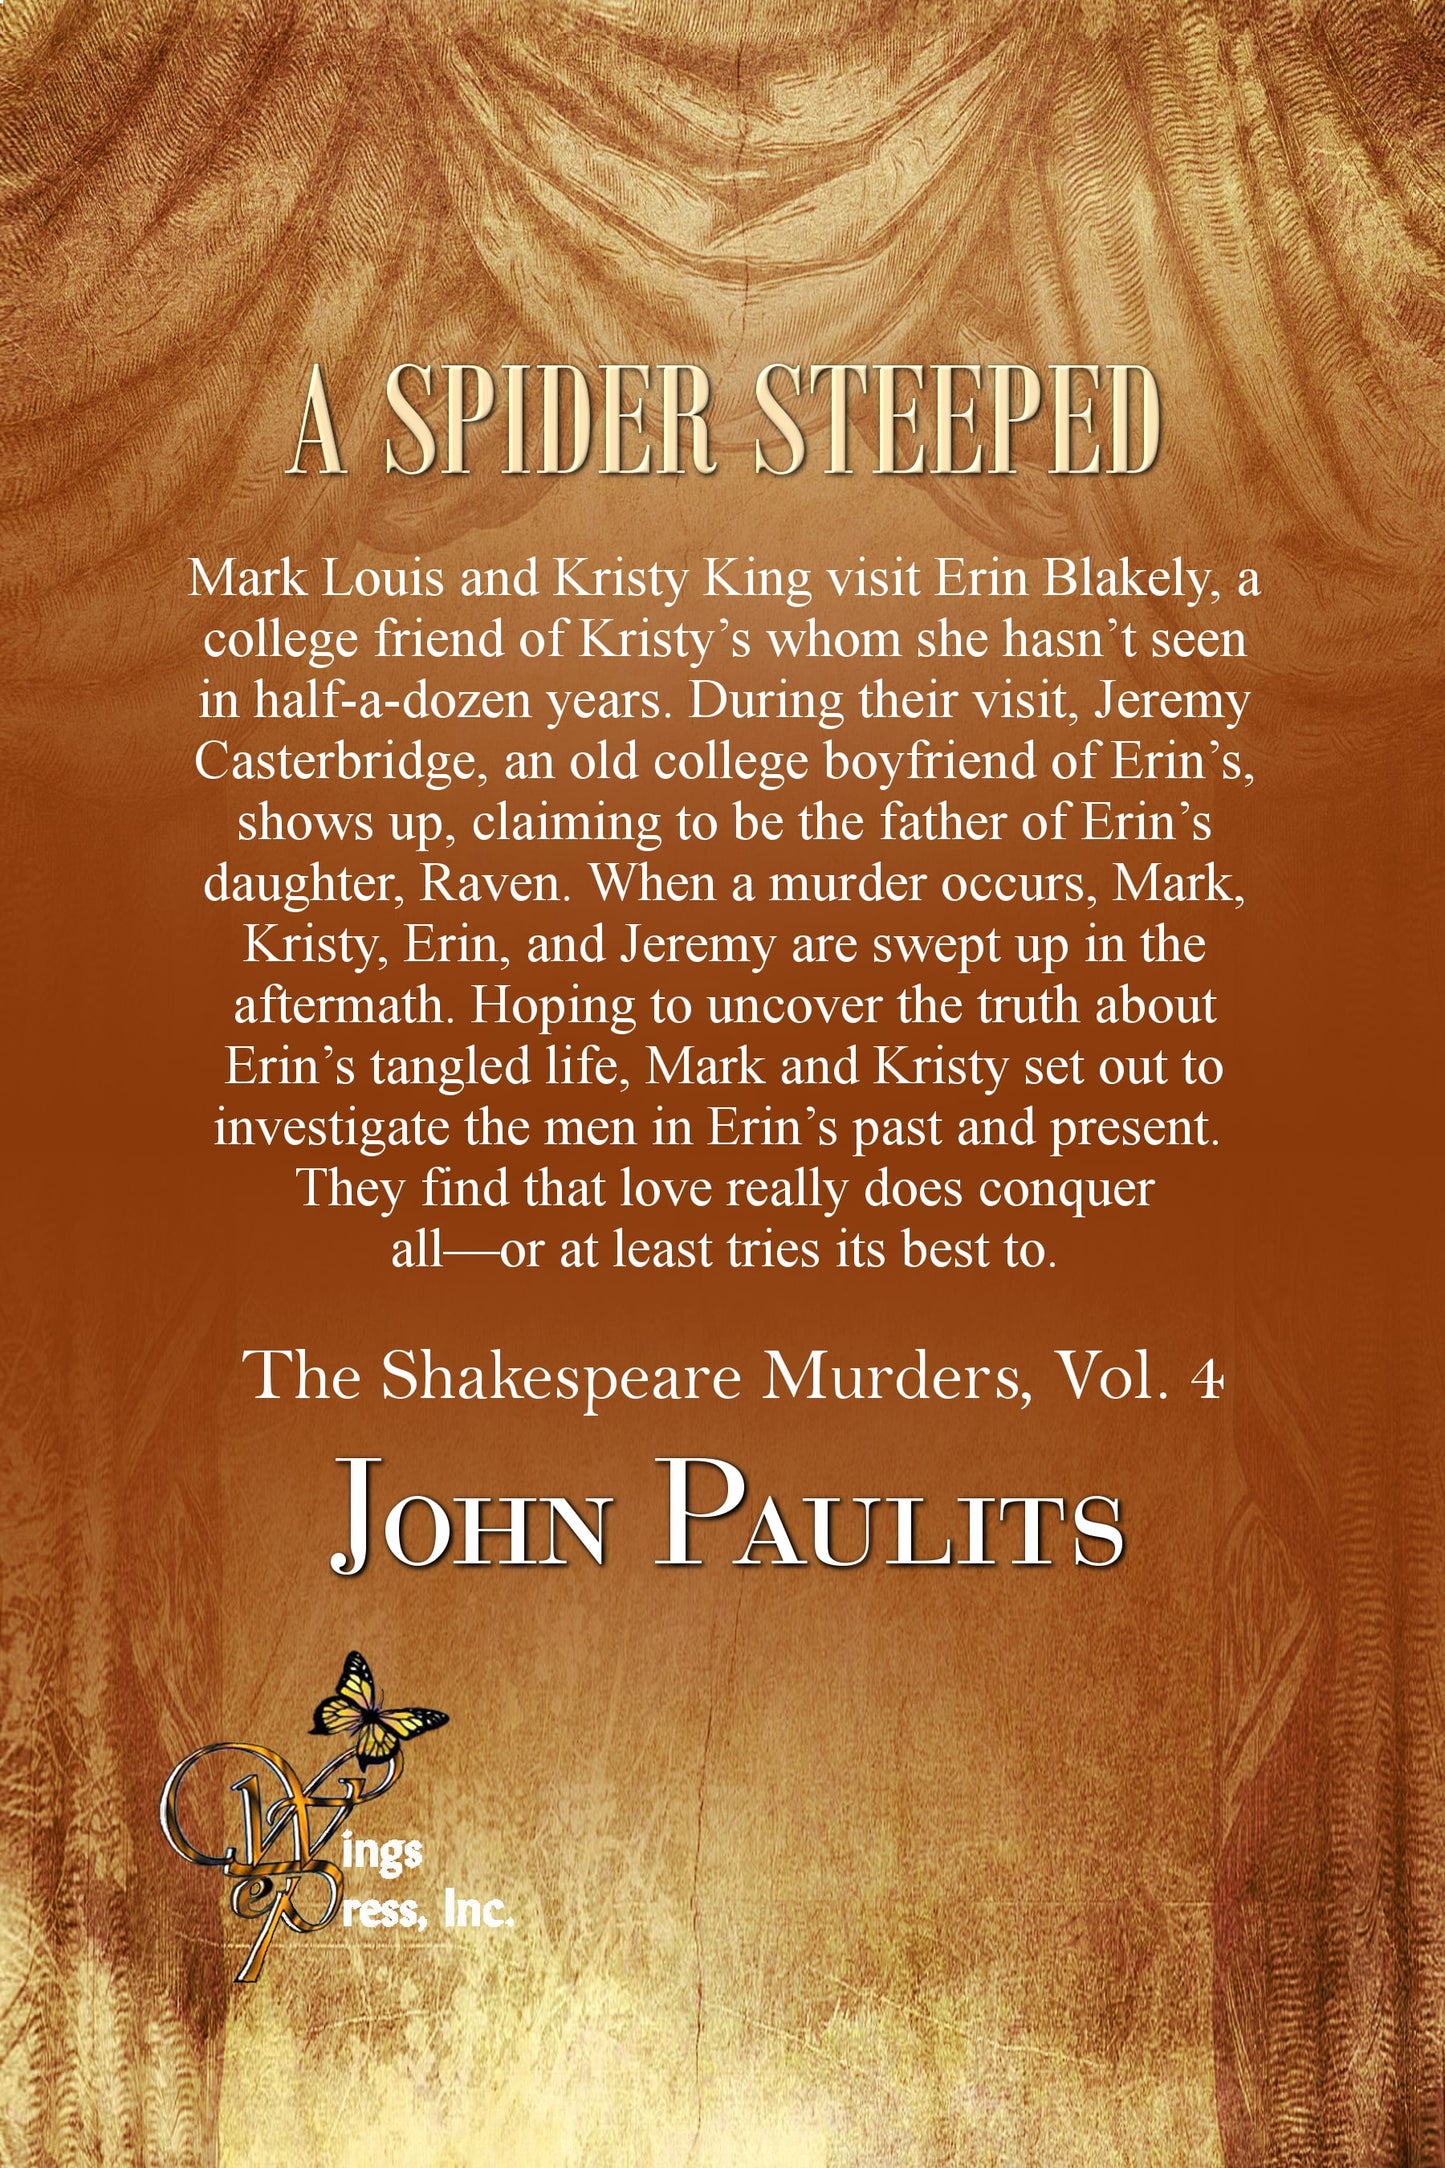 A Spider Steeped